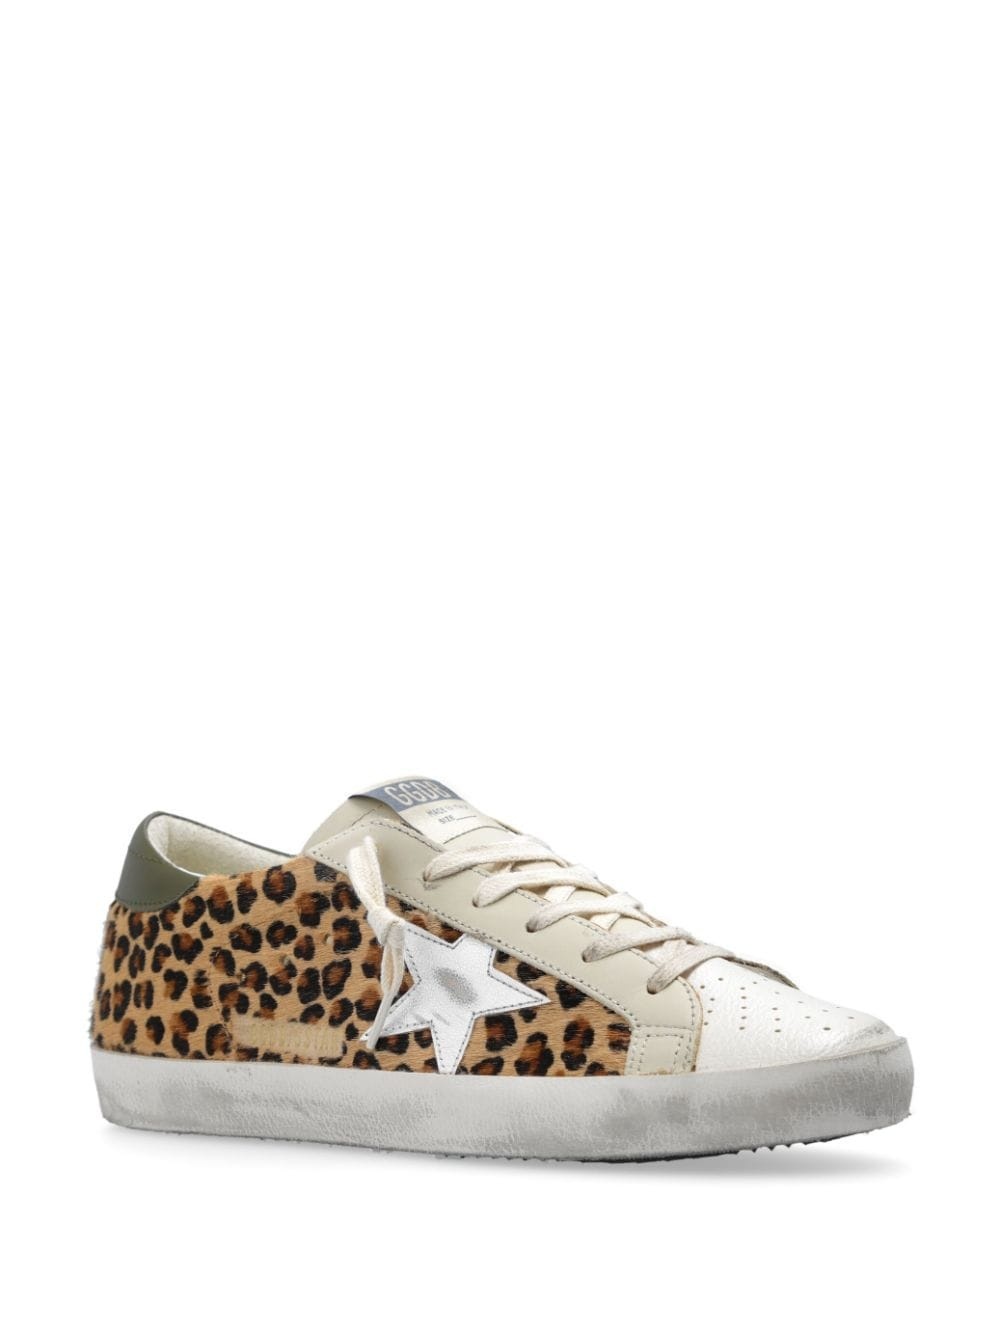 Super star leather sneakers - 5